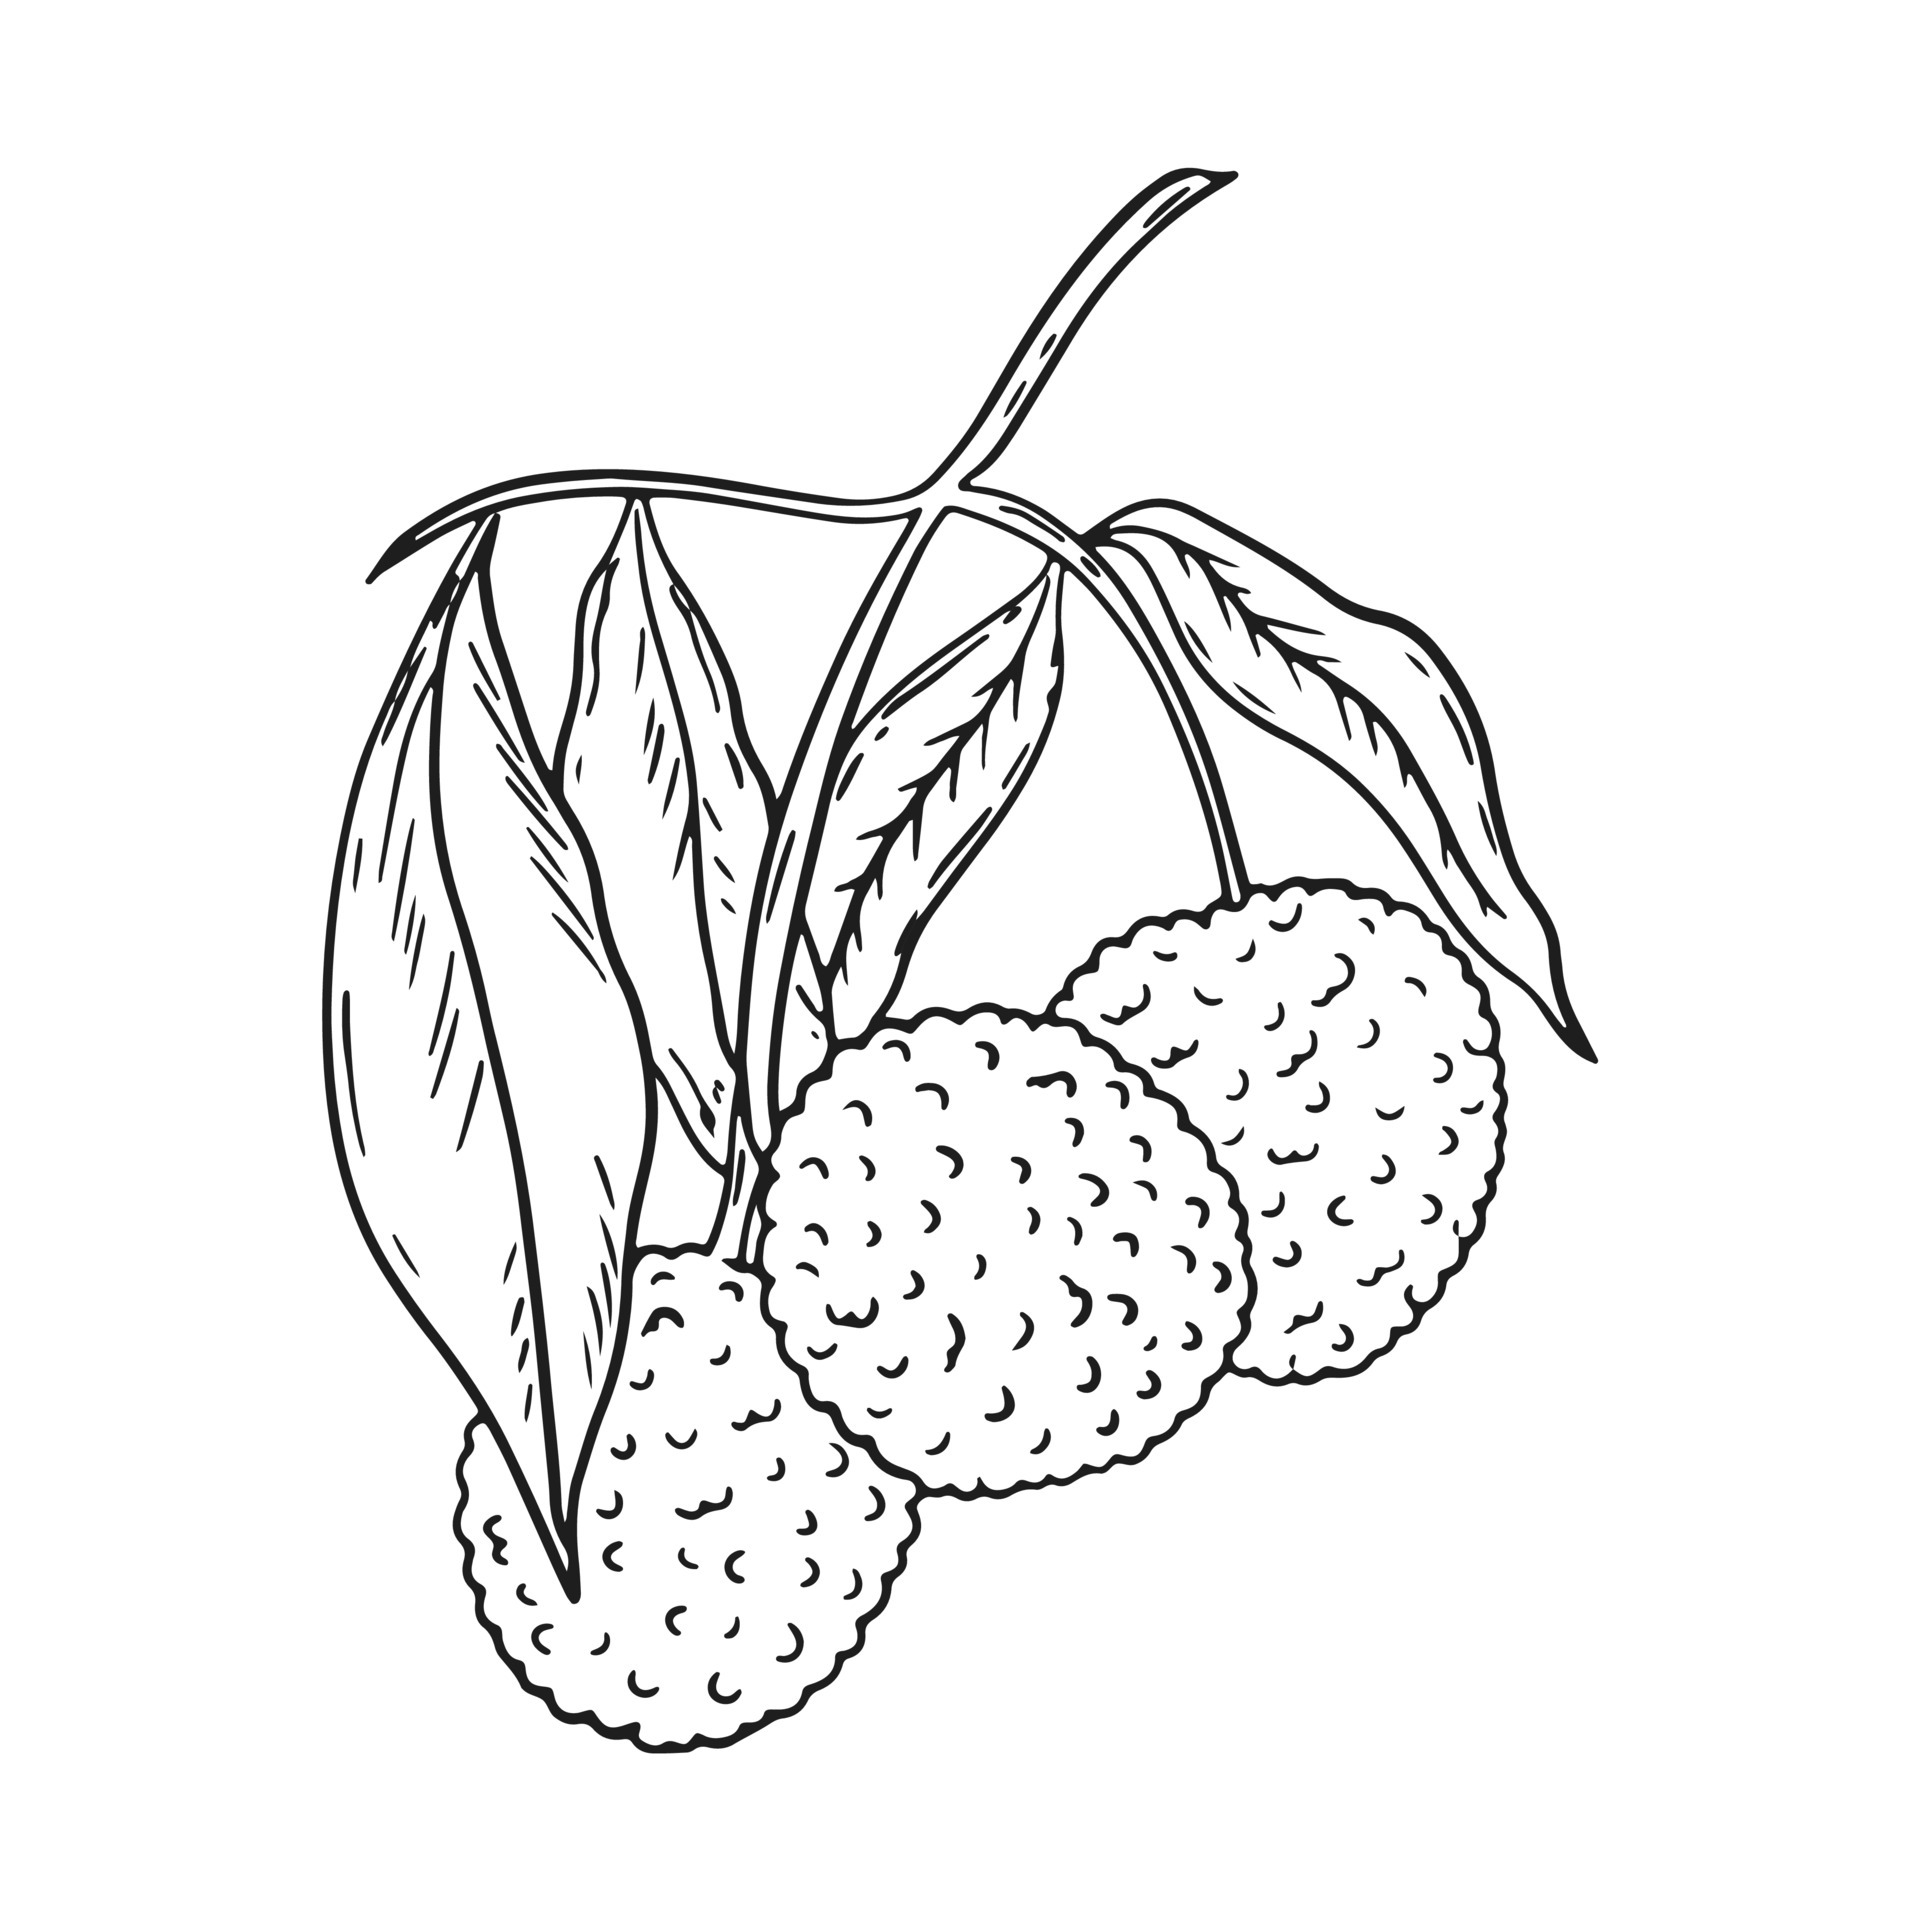 How to Draw a Lychee Fruit Step by Step - YouTube